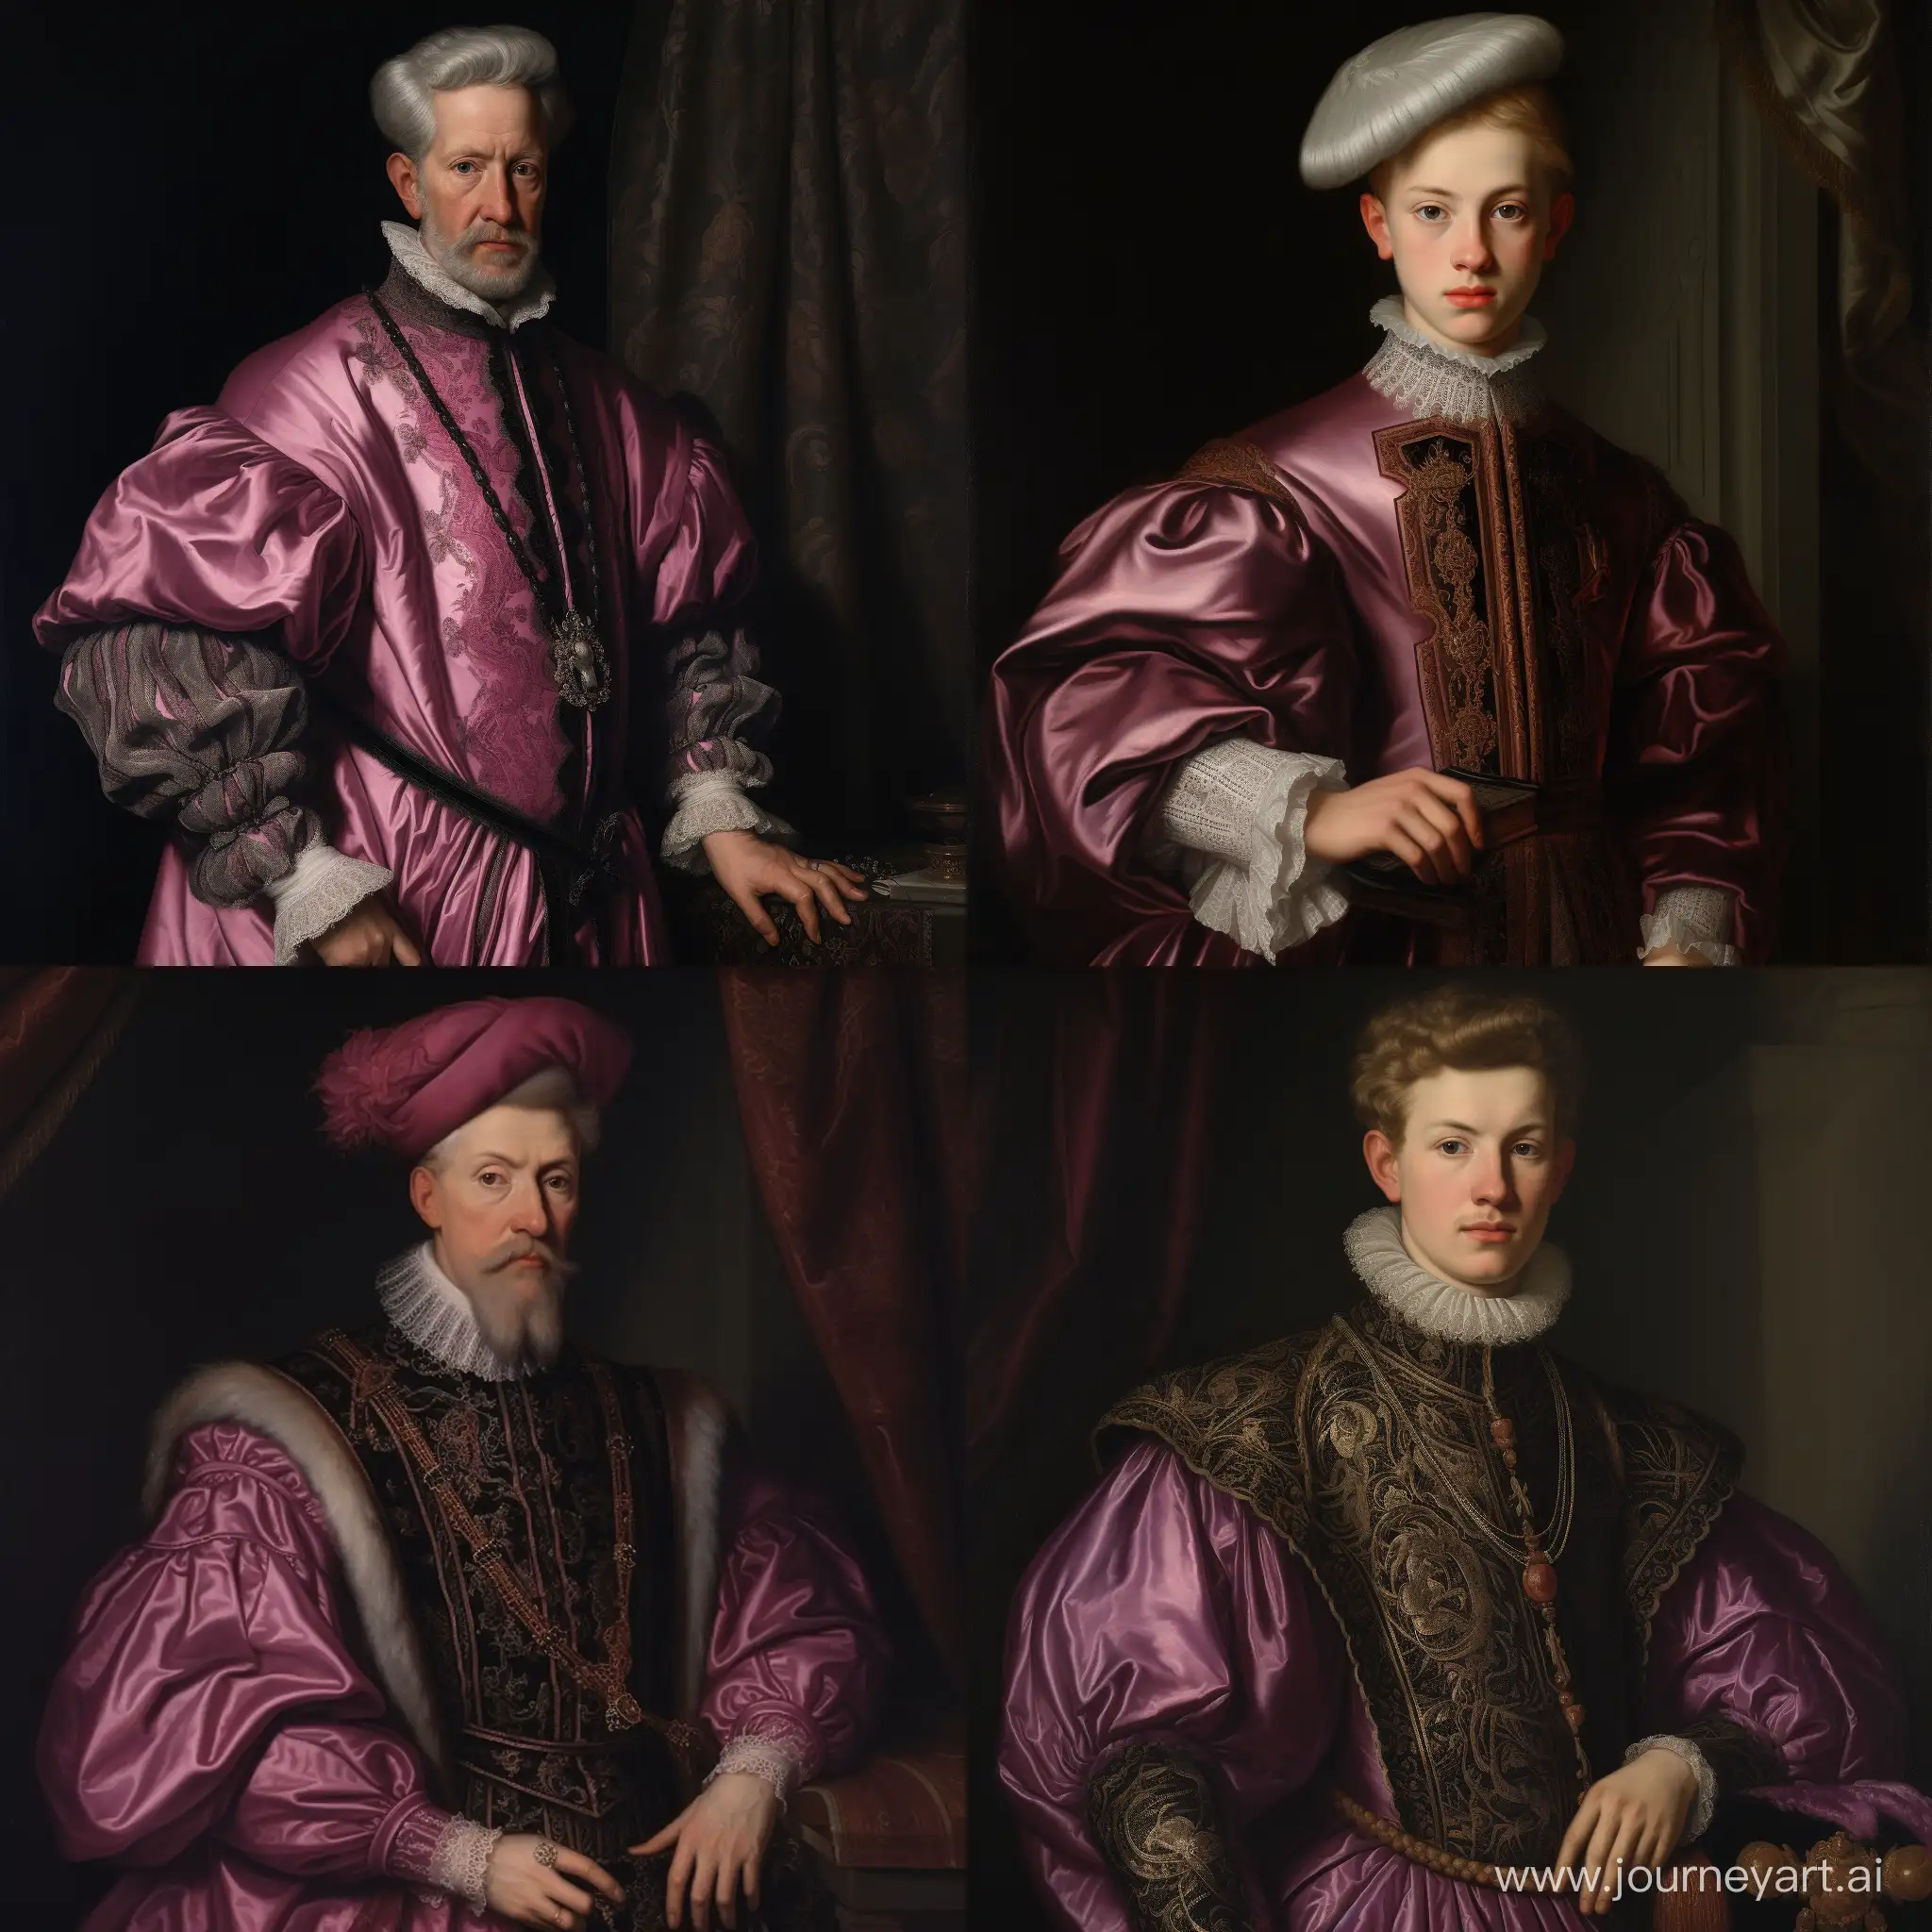 A silver-haired young bishop male, but wearing a purple velvet skirt